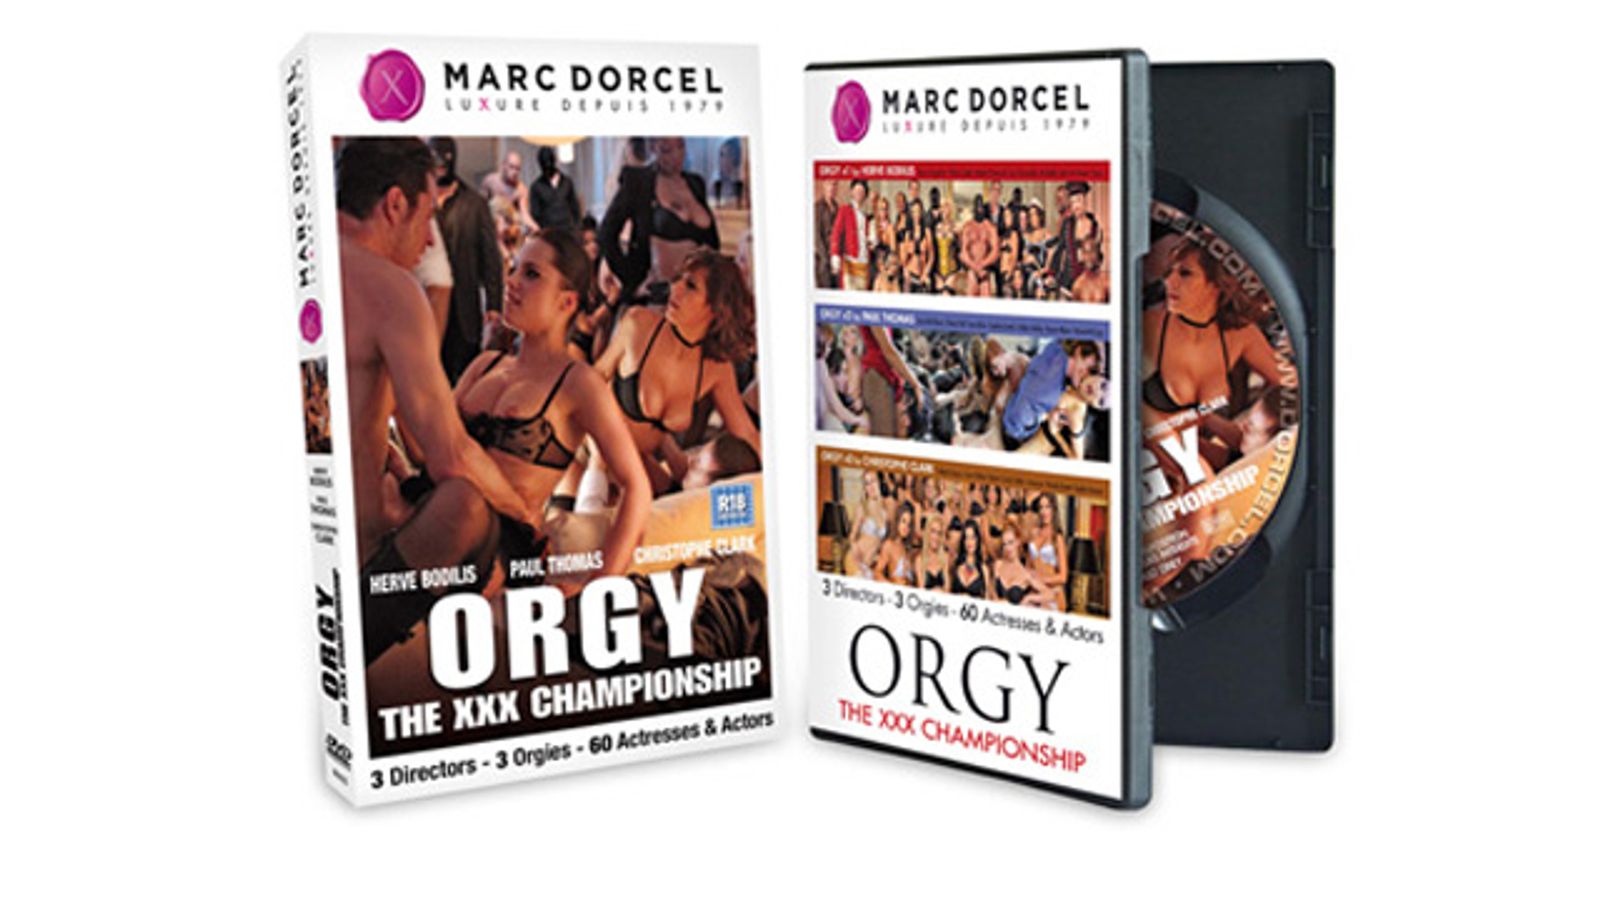 Marc Dorcel Drafts 3 Top Directors to Compete in Orgy Release